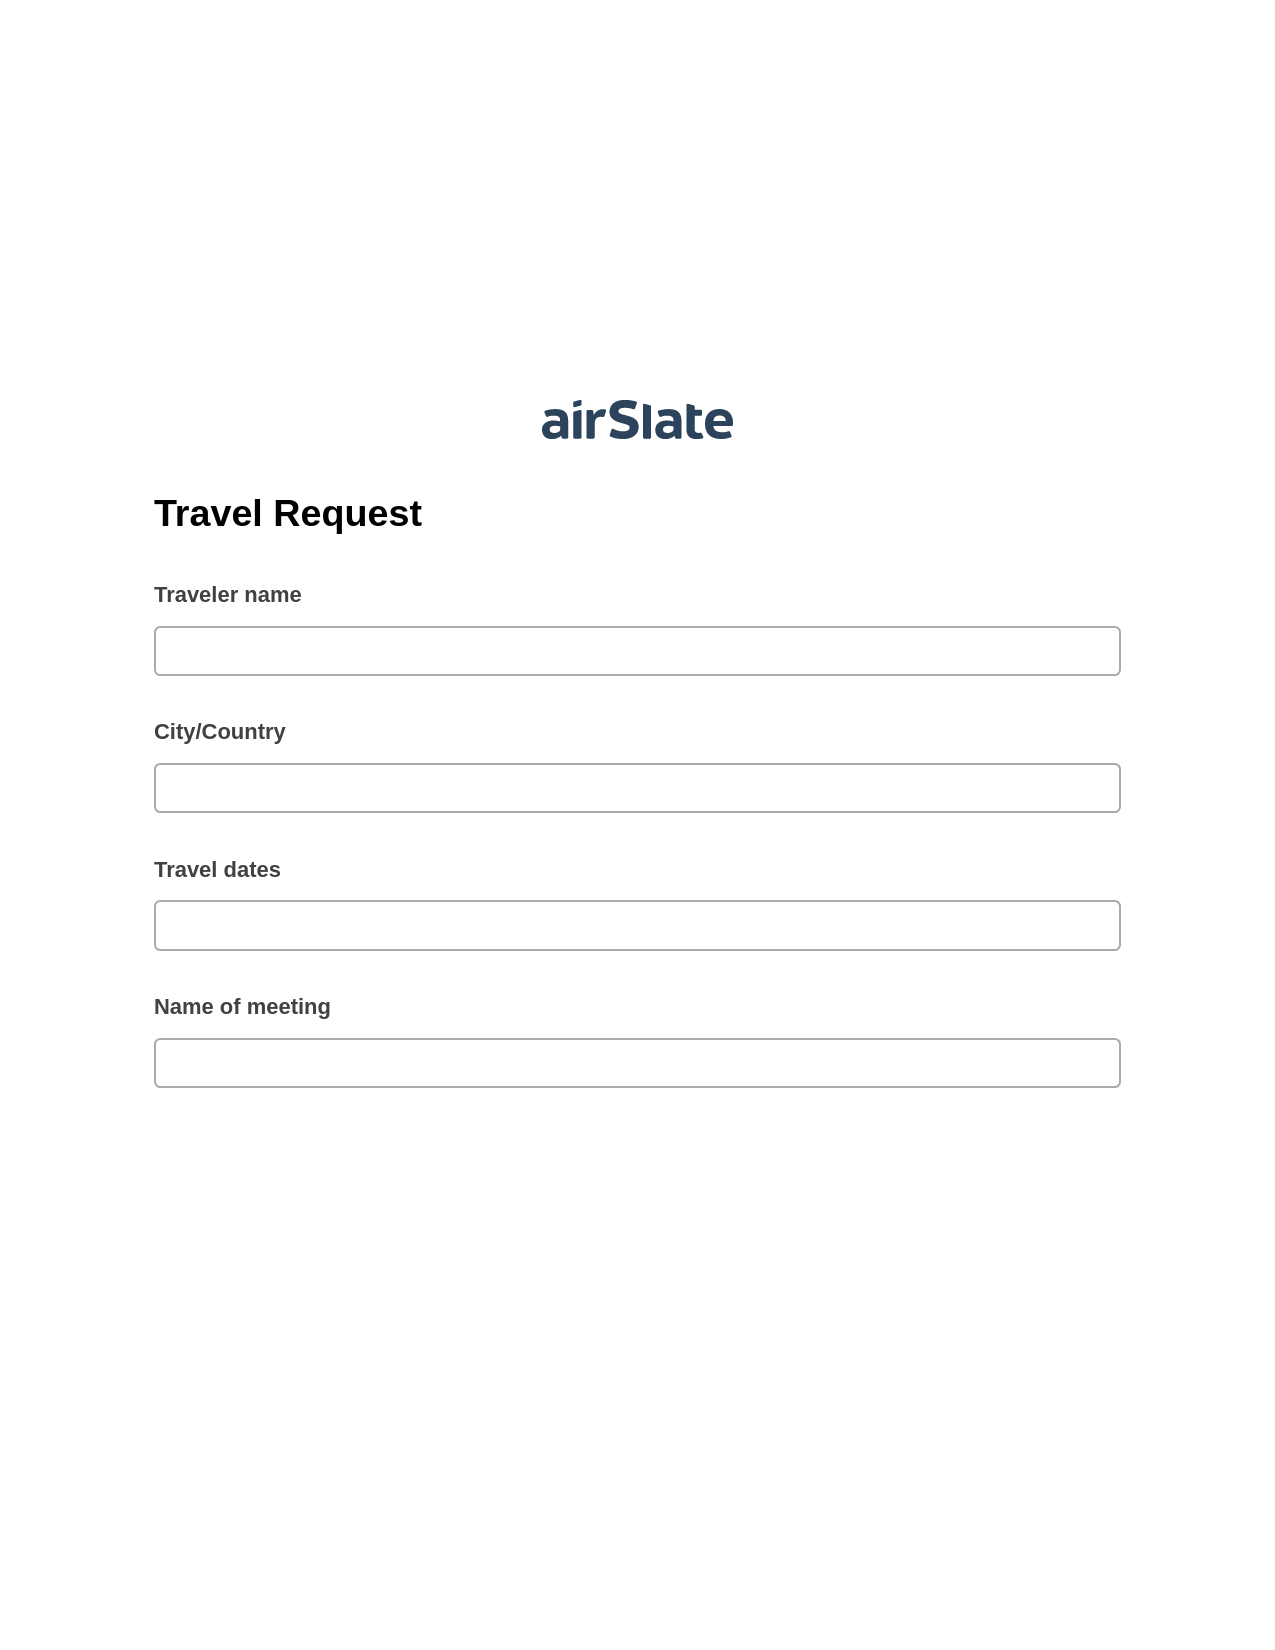 Travel Request Pre-fill Dropdowns from Google Sheet Bot, Create slate addon, Export to Google Sheet Bot